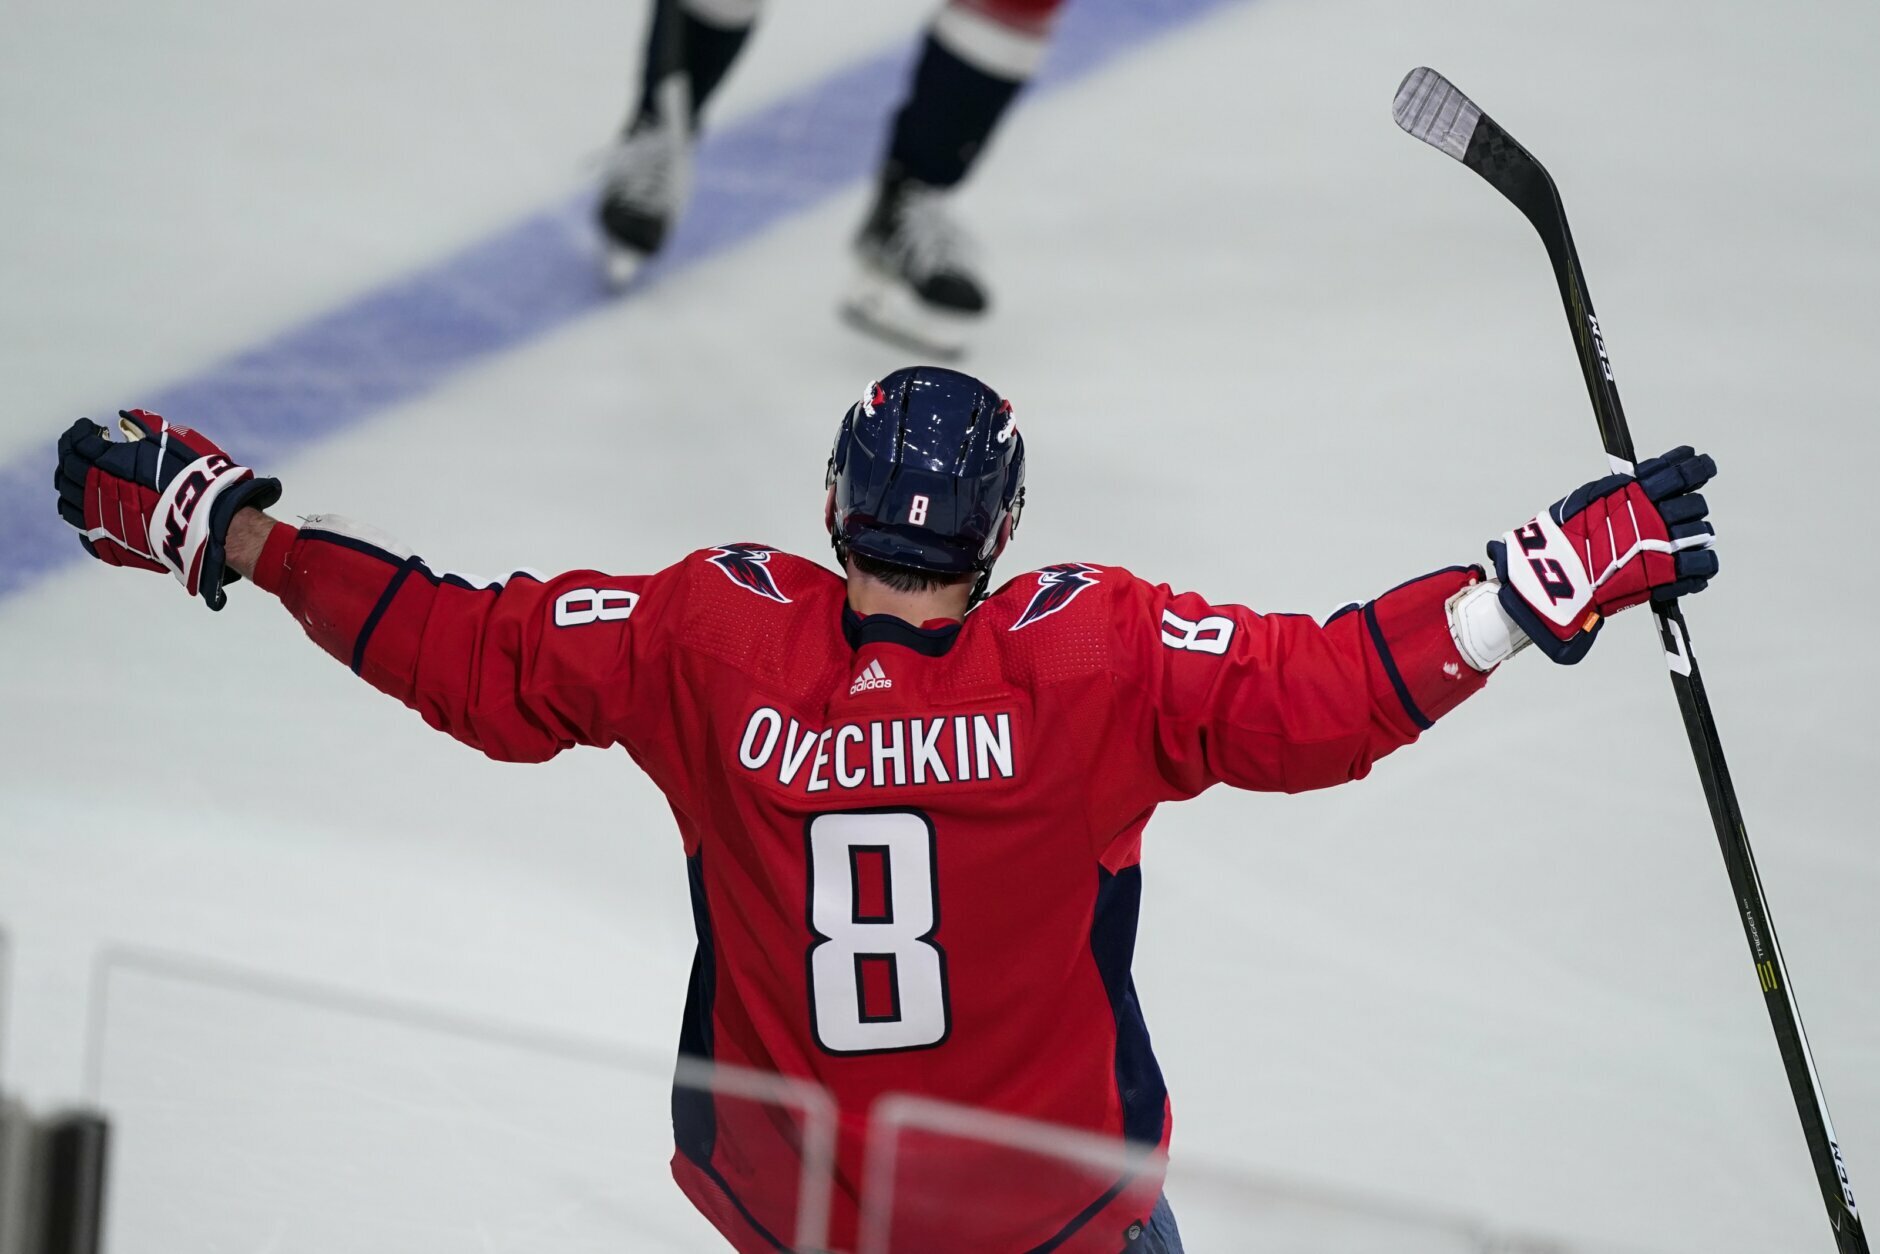 Alex Ovechkin Is Chasing Wayne Gretzky's Goals Record - The New York Times